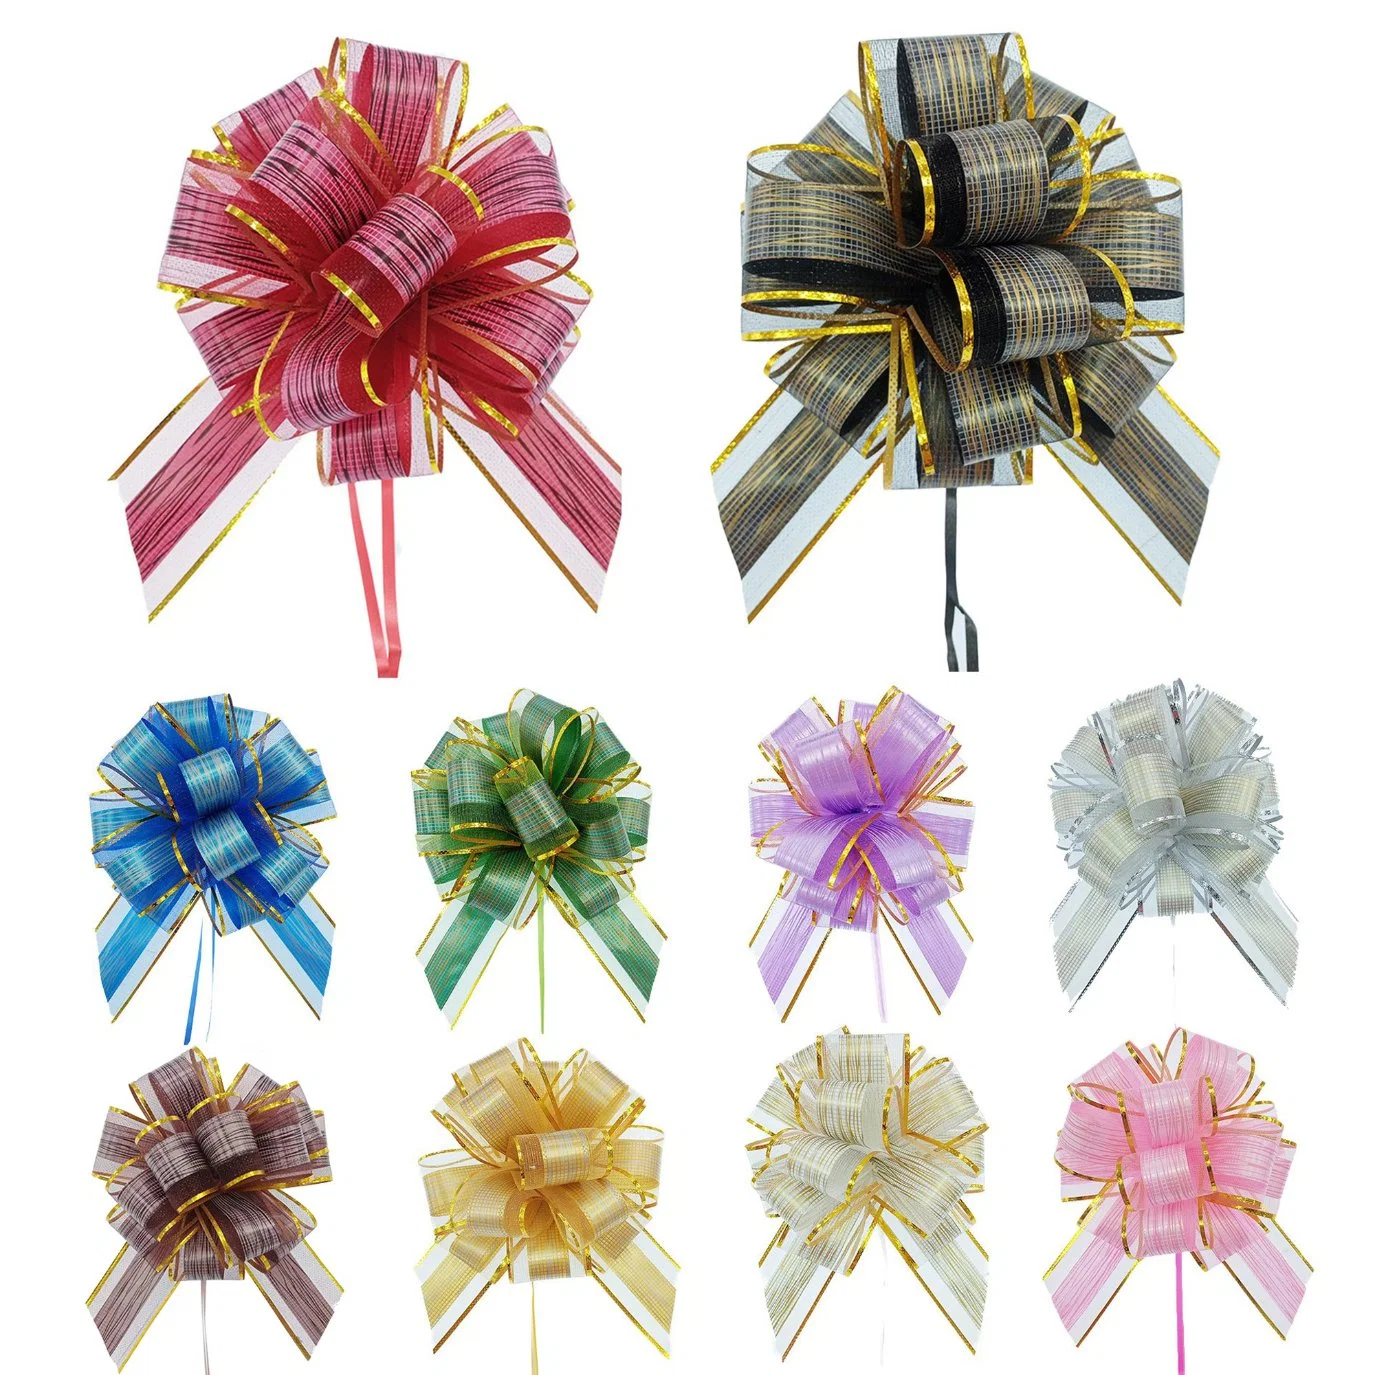 Pieces Pull Bows Decorative Assorted Colors Gift Wrap Ribbon Pull Bows for Christmas